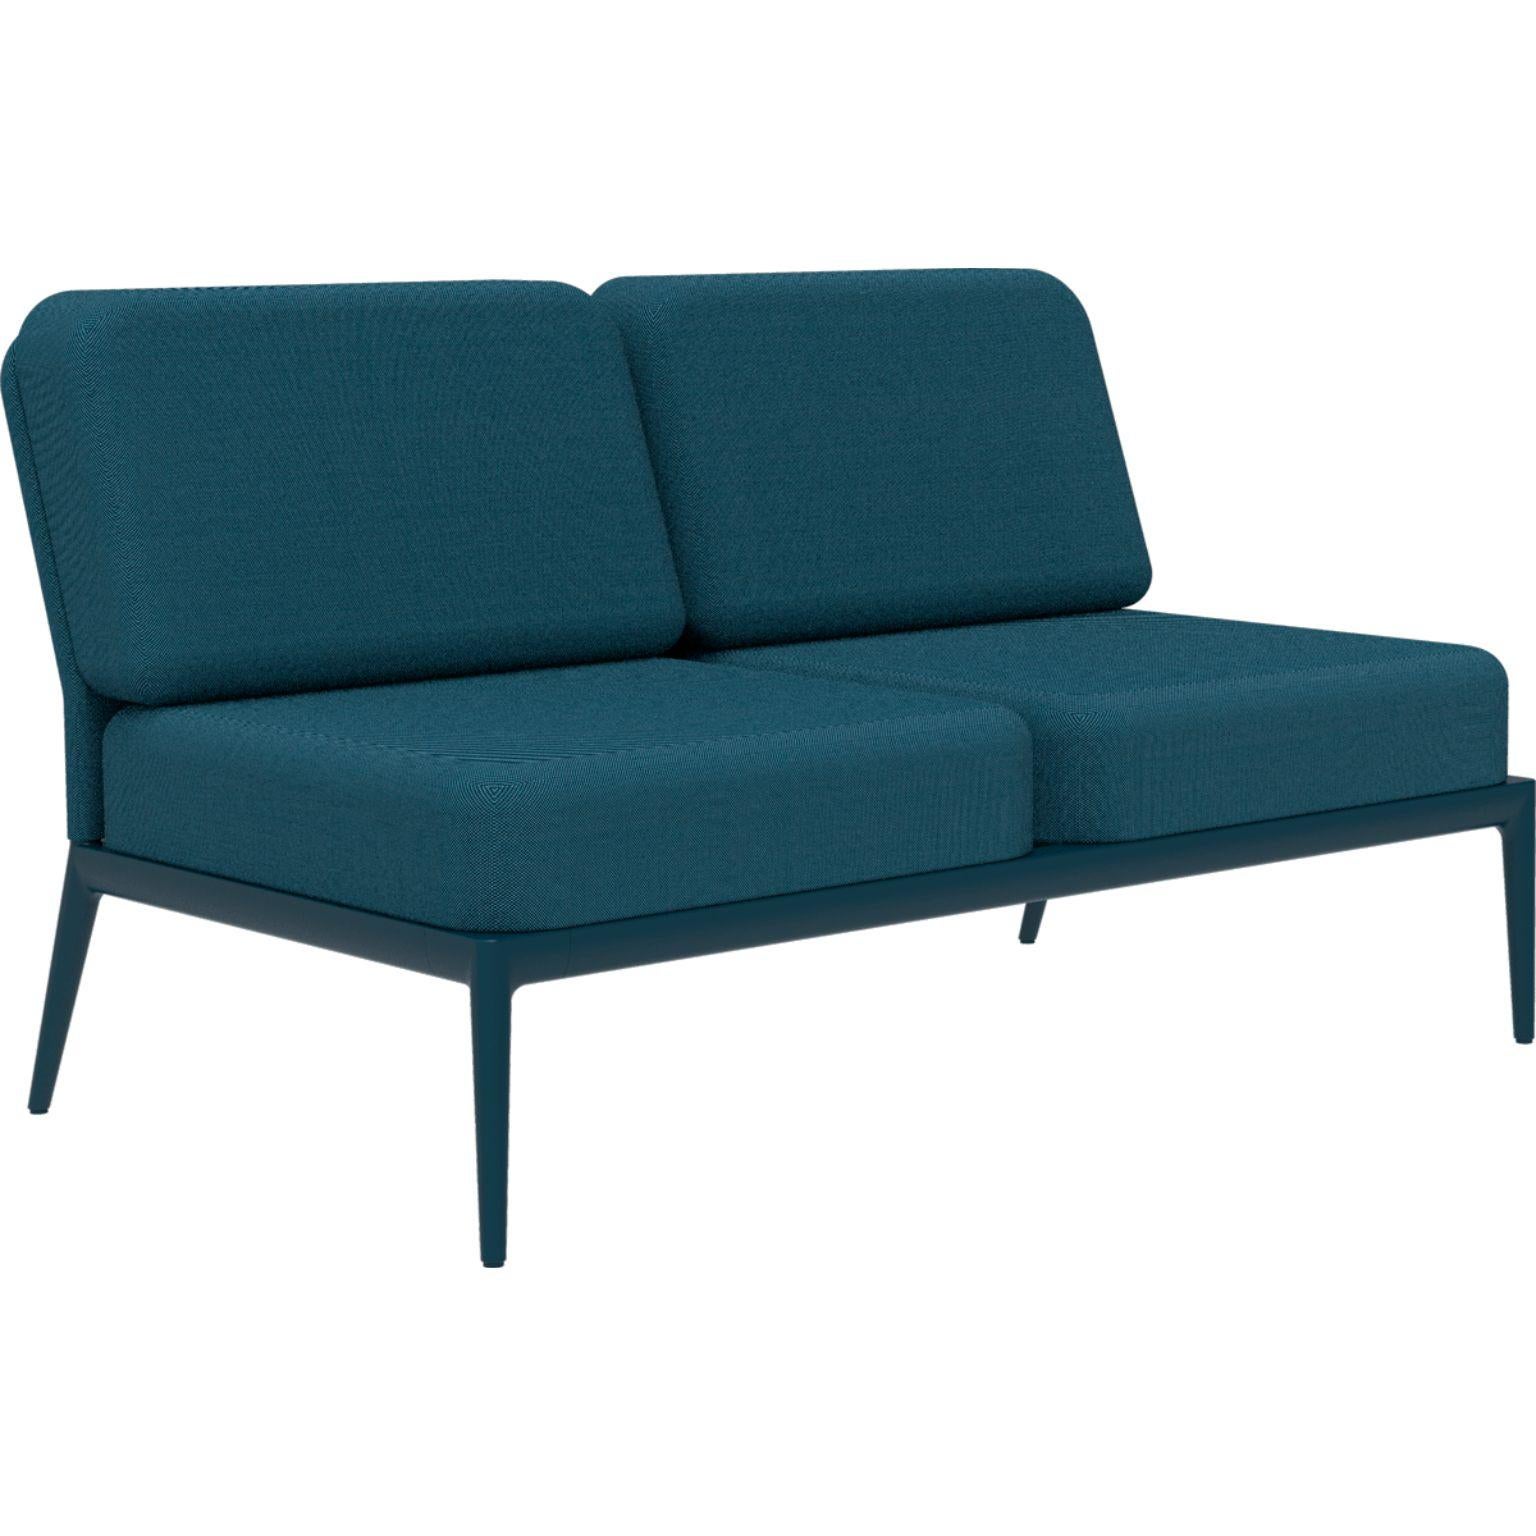 Cover Navy Double Central modular sofa by MOWEE
Dimensions: D83 x W136 x H81 cm (seat height 42 cm).
Material: Aluminum and upholstery.
Weight: 27 kg.
Also available in different colors and finishes. 

An unmistakable collection for its beauty